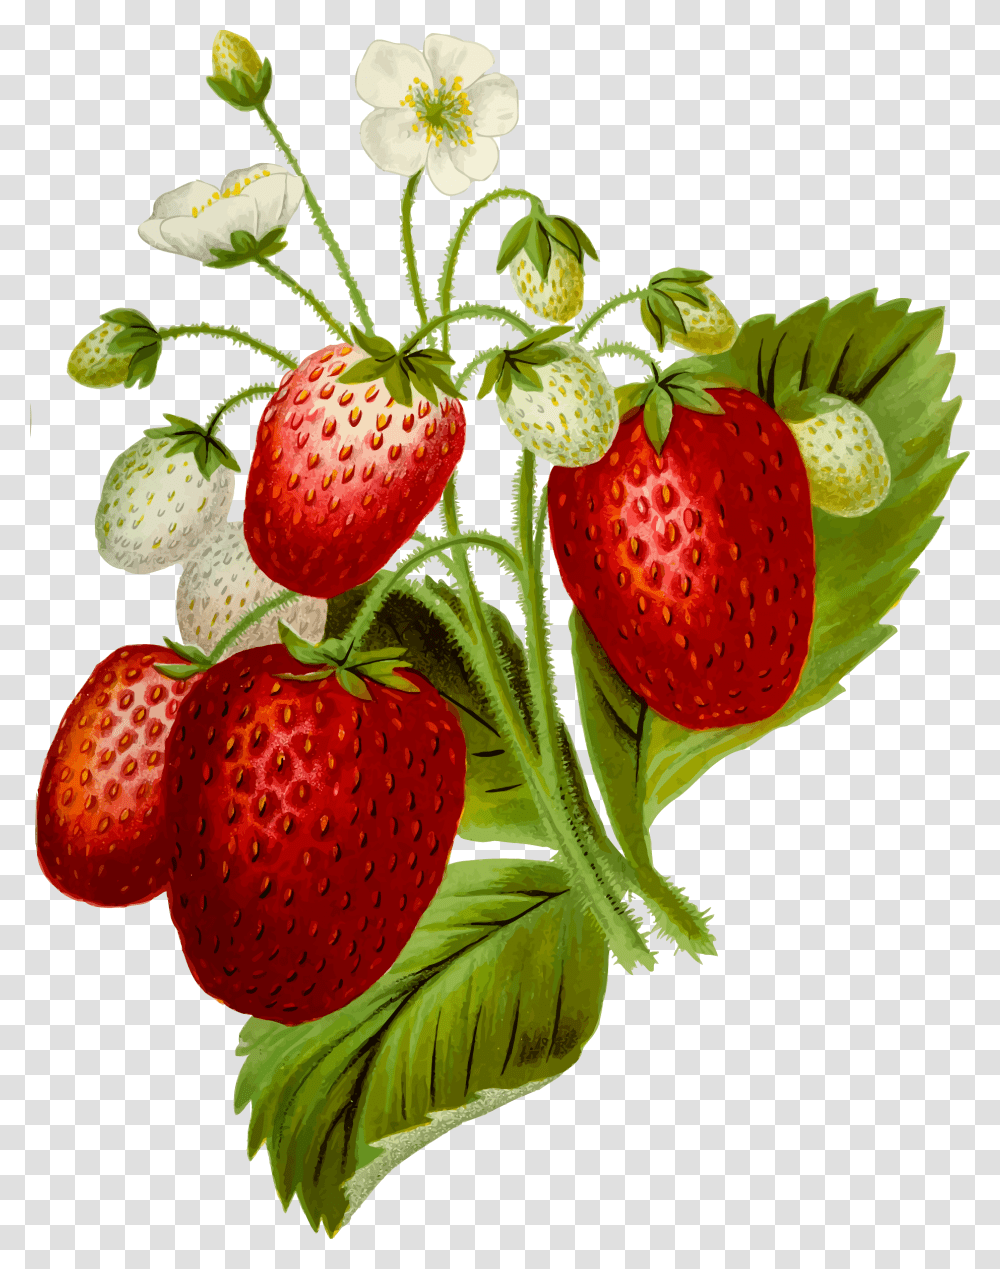 Strawberries 2 Clip Arts Clipart Strawberry Plant, Fruit, Food Transparent Png